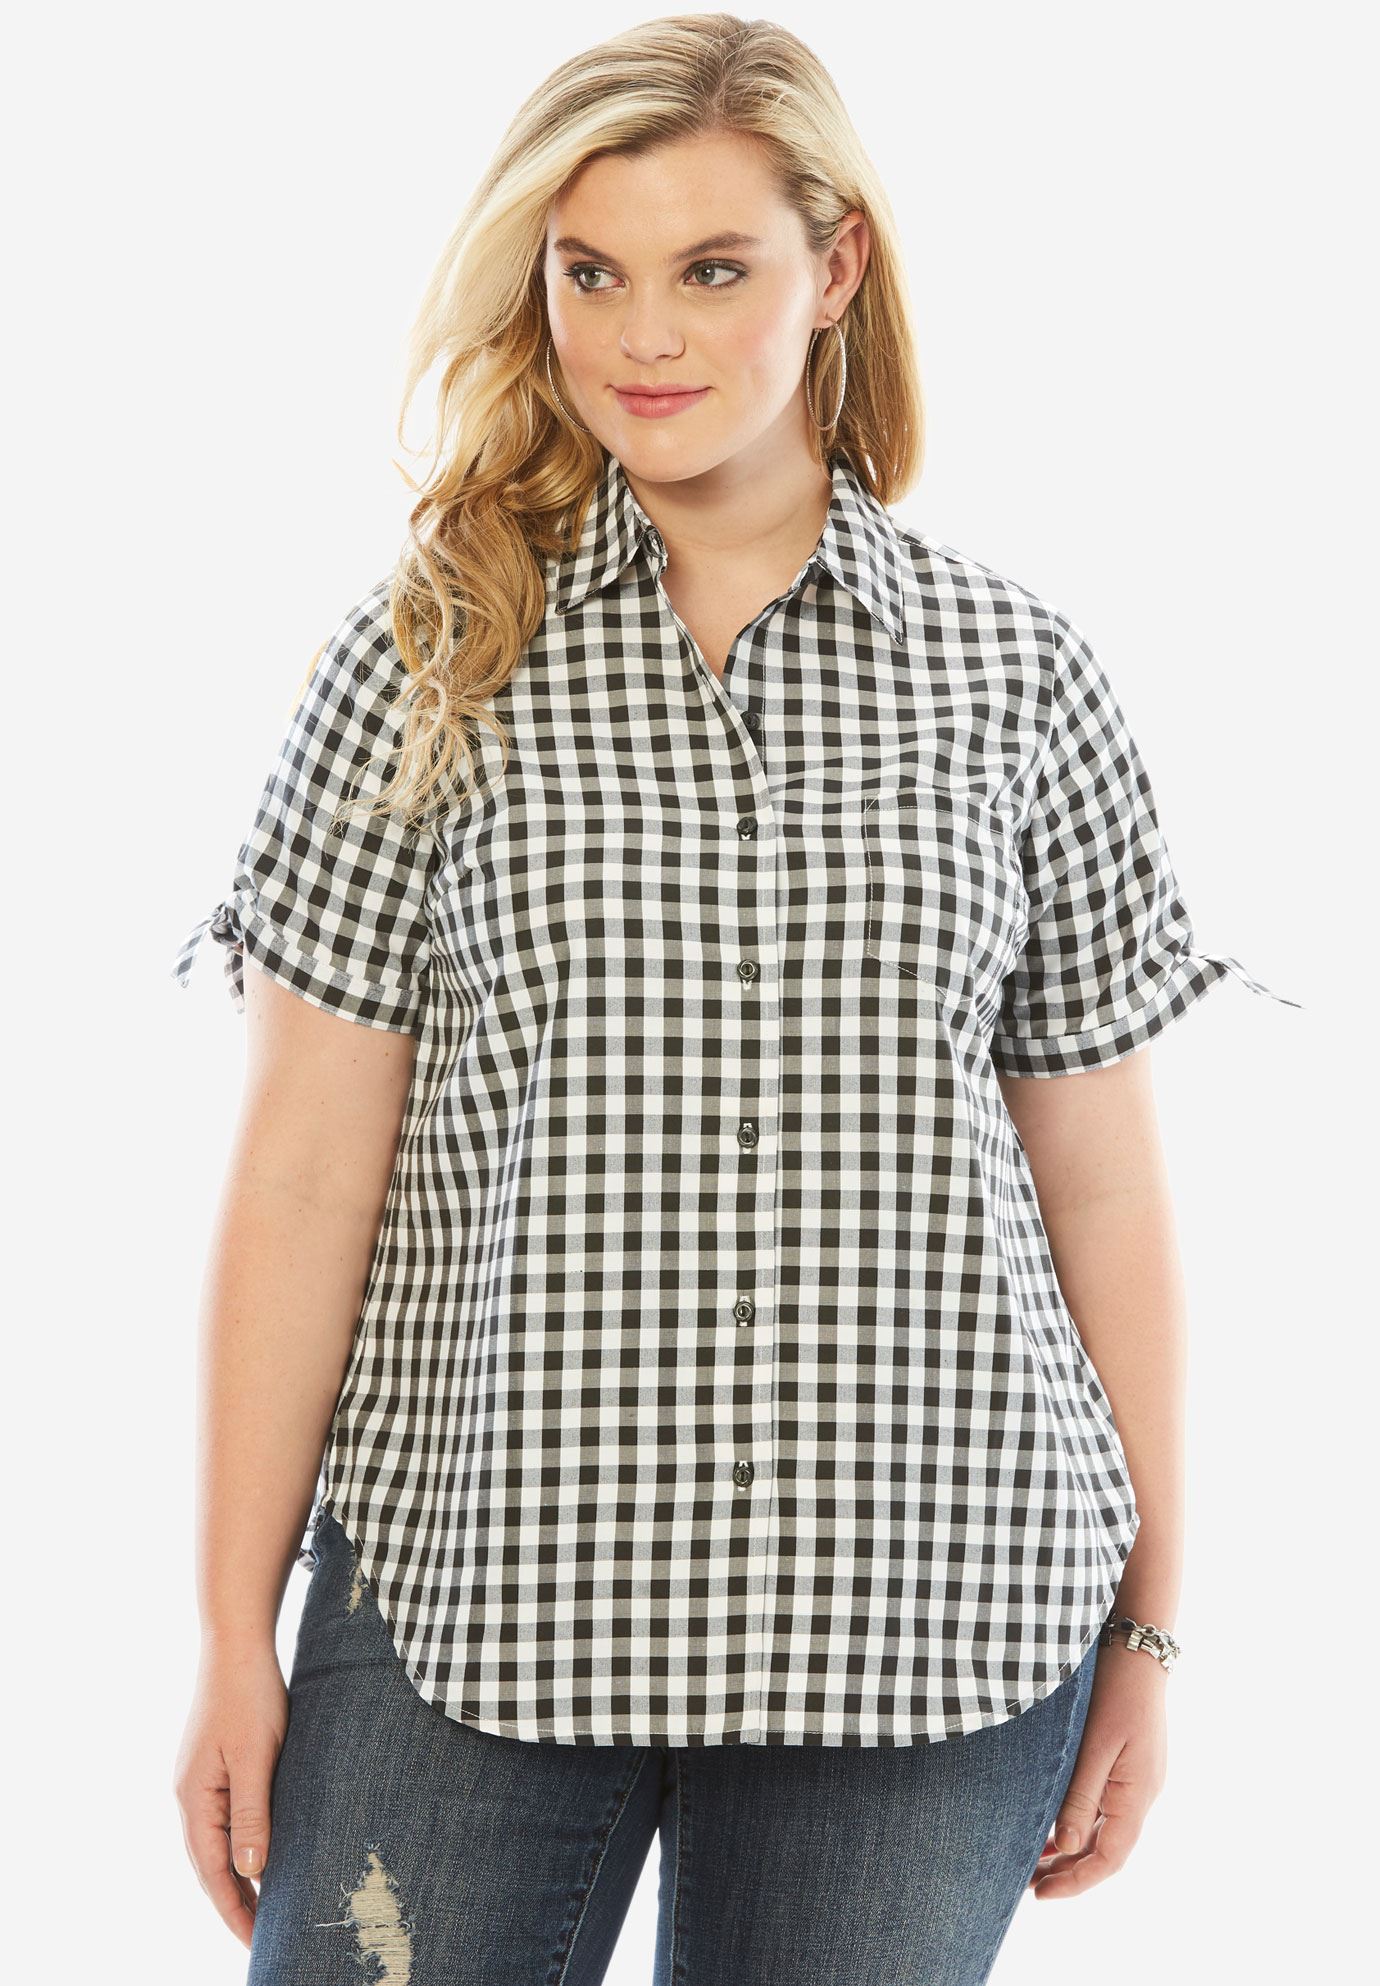 Gingham Shirt with Sleeve Ties| Plus Size Summer Tops | Roaman's